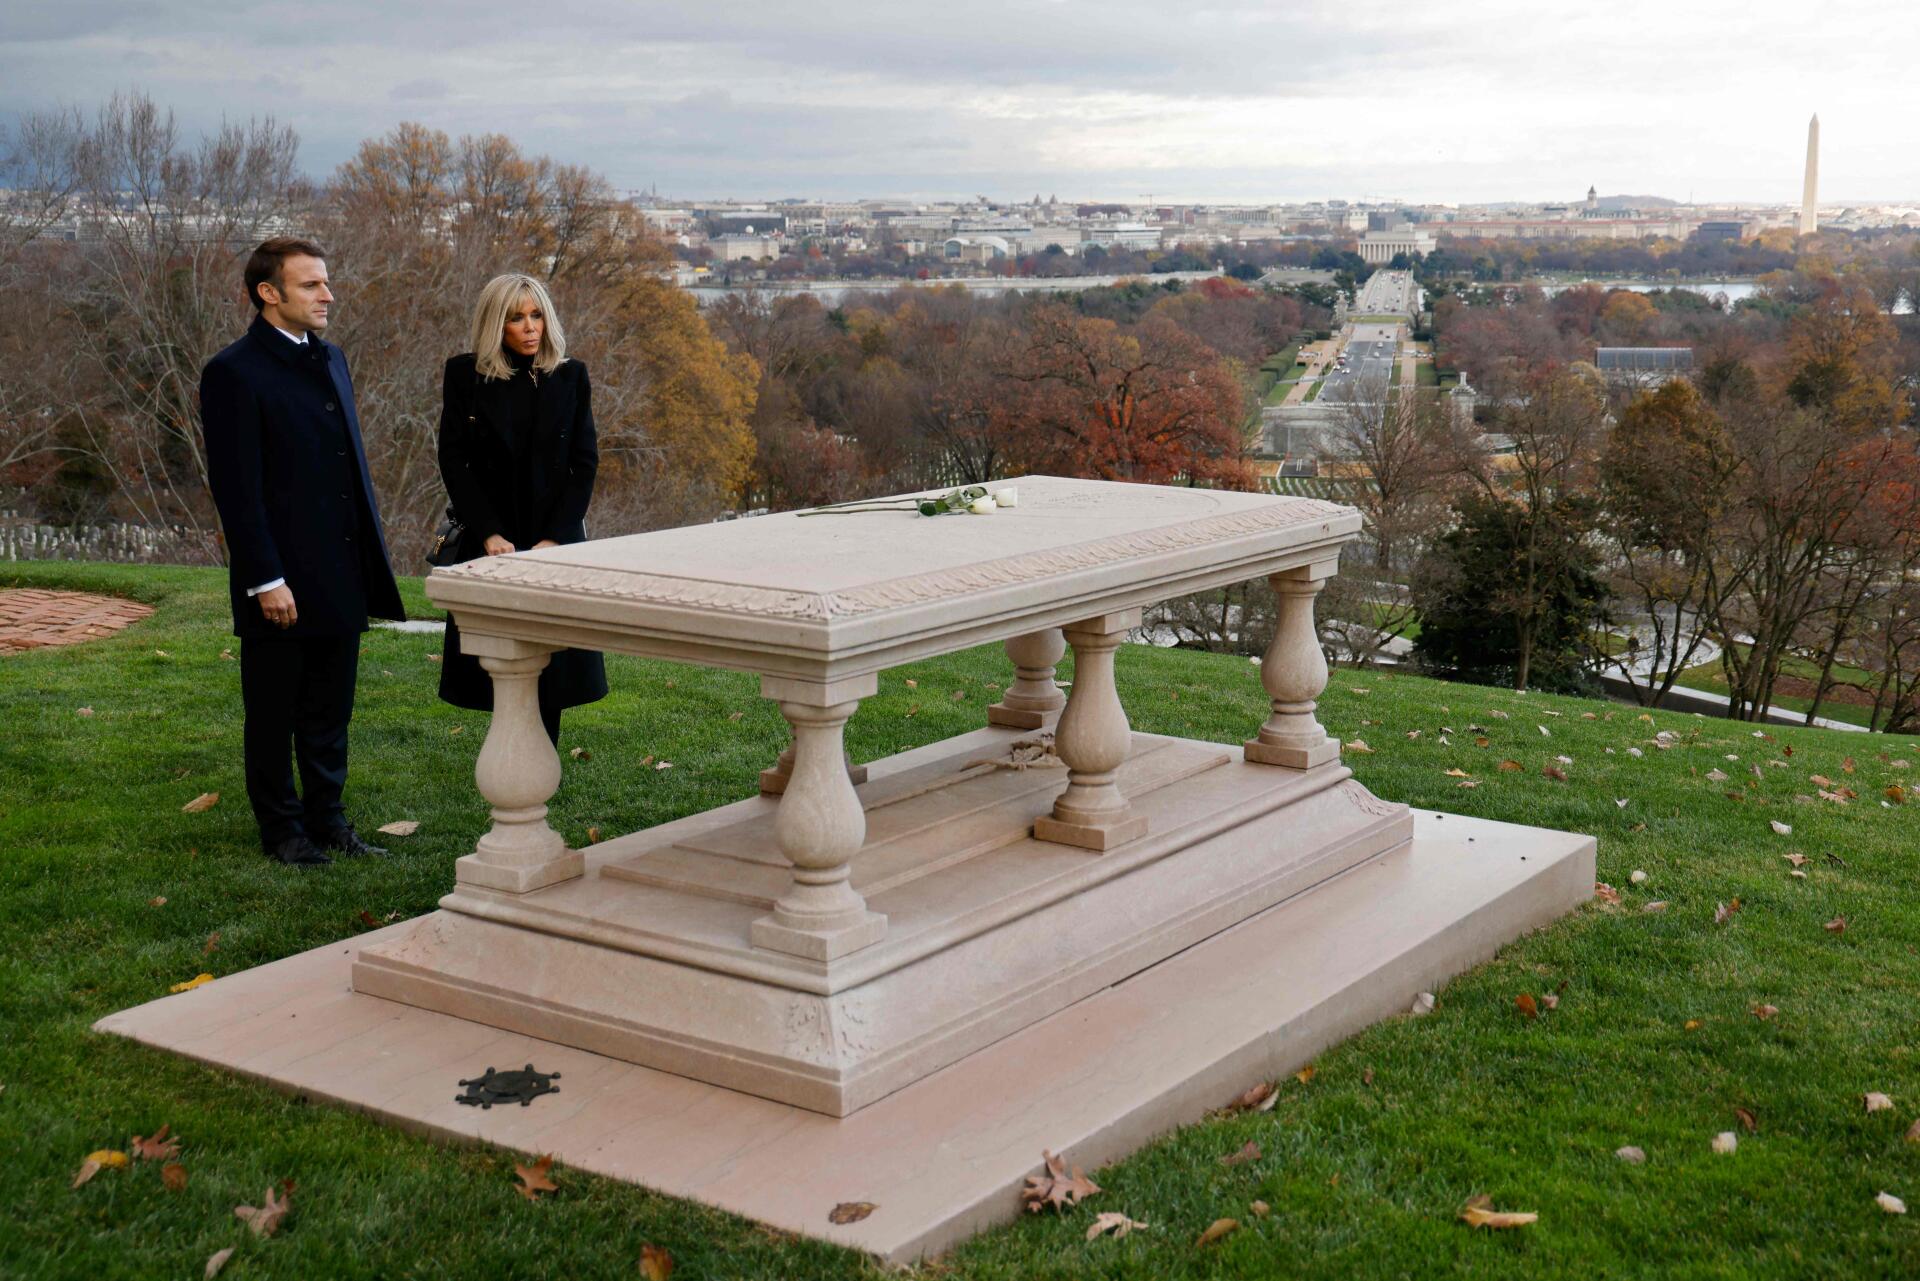 French President Emmanuel Macron and his wife Brigitte Macron visit the tomb of French-American military engineer Pierre Charles L'Enfant at Arlington National Cemetery in Arlington, Virginia.